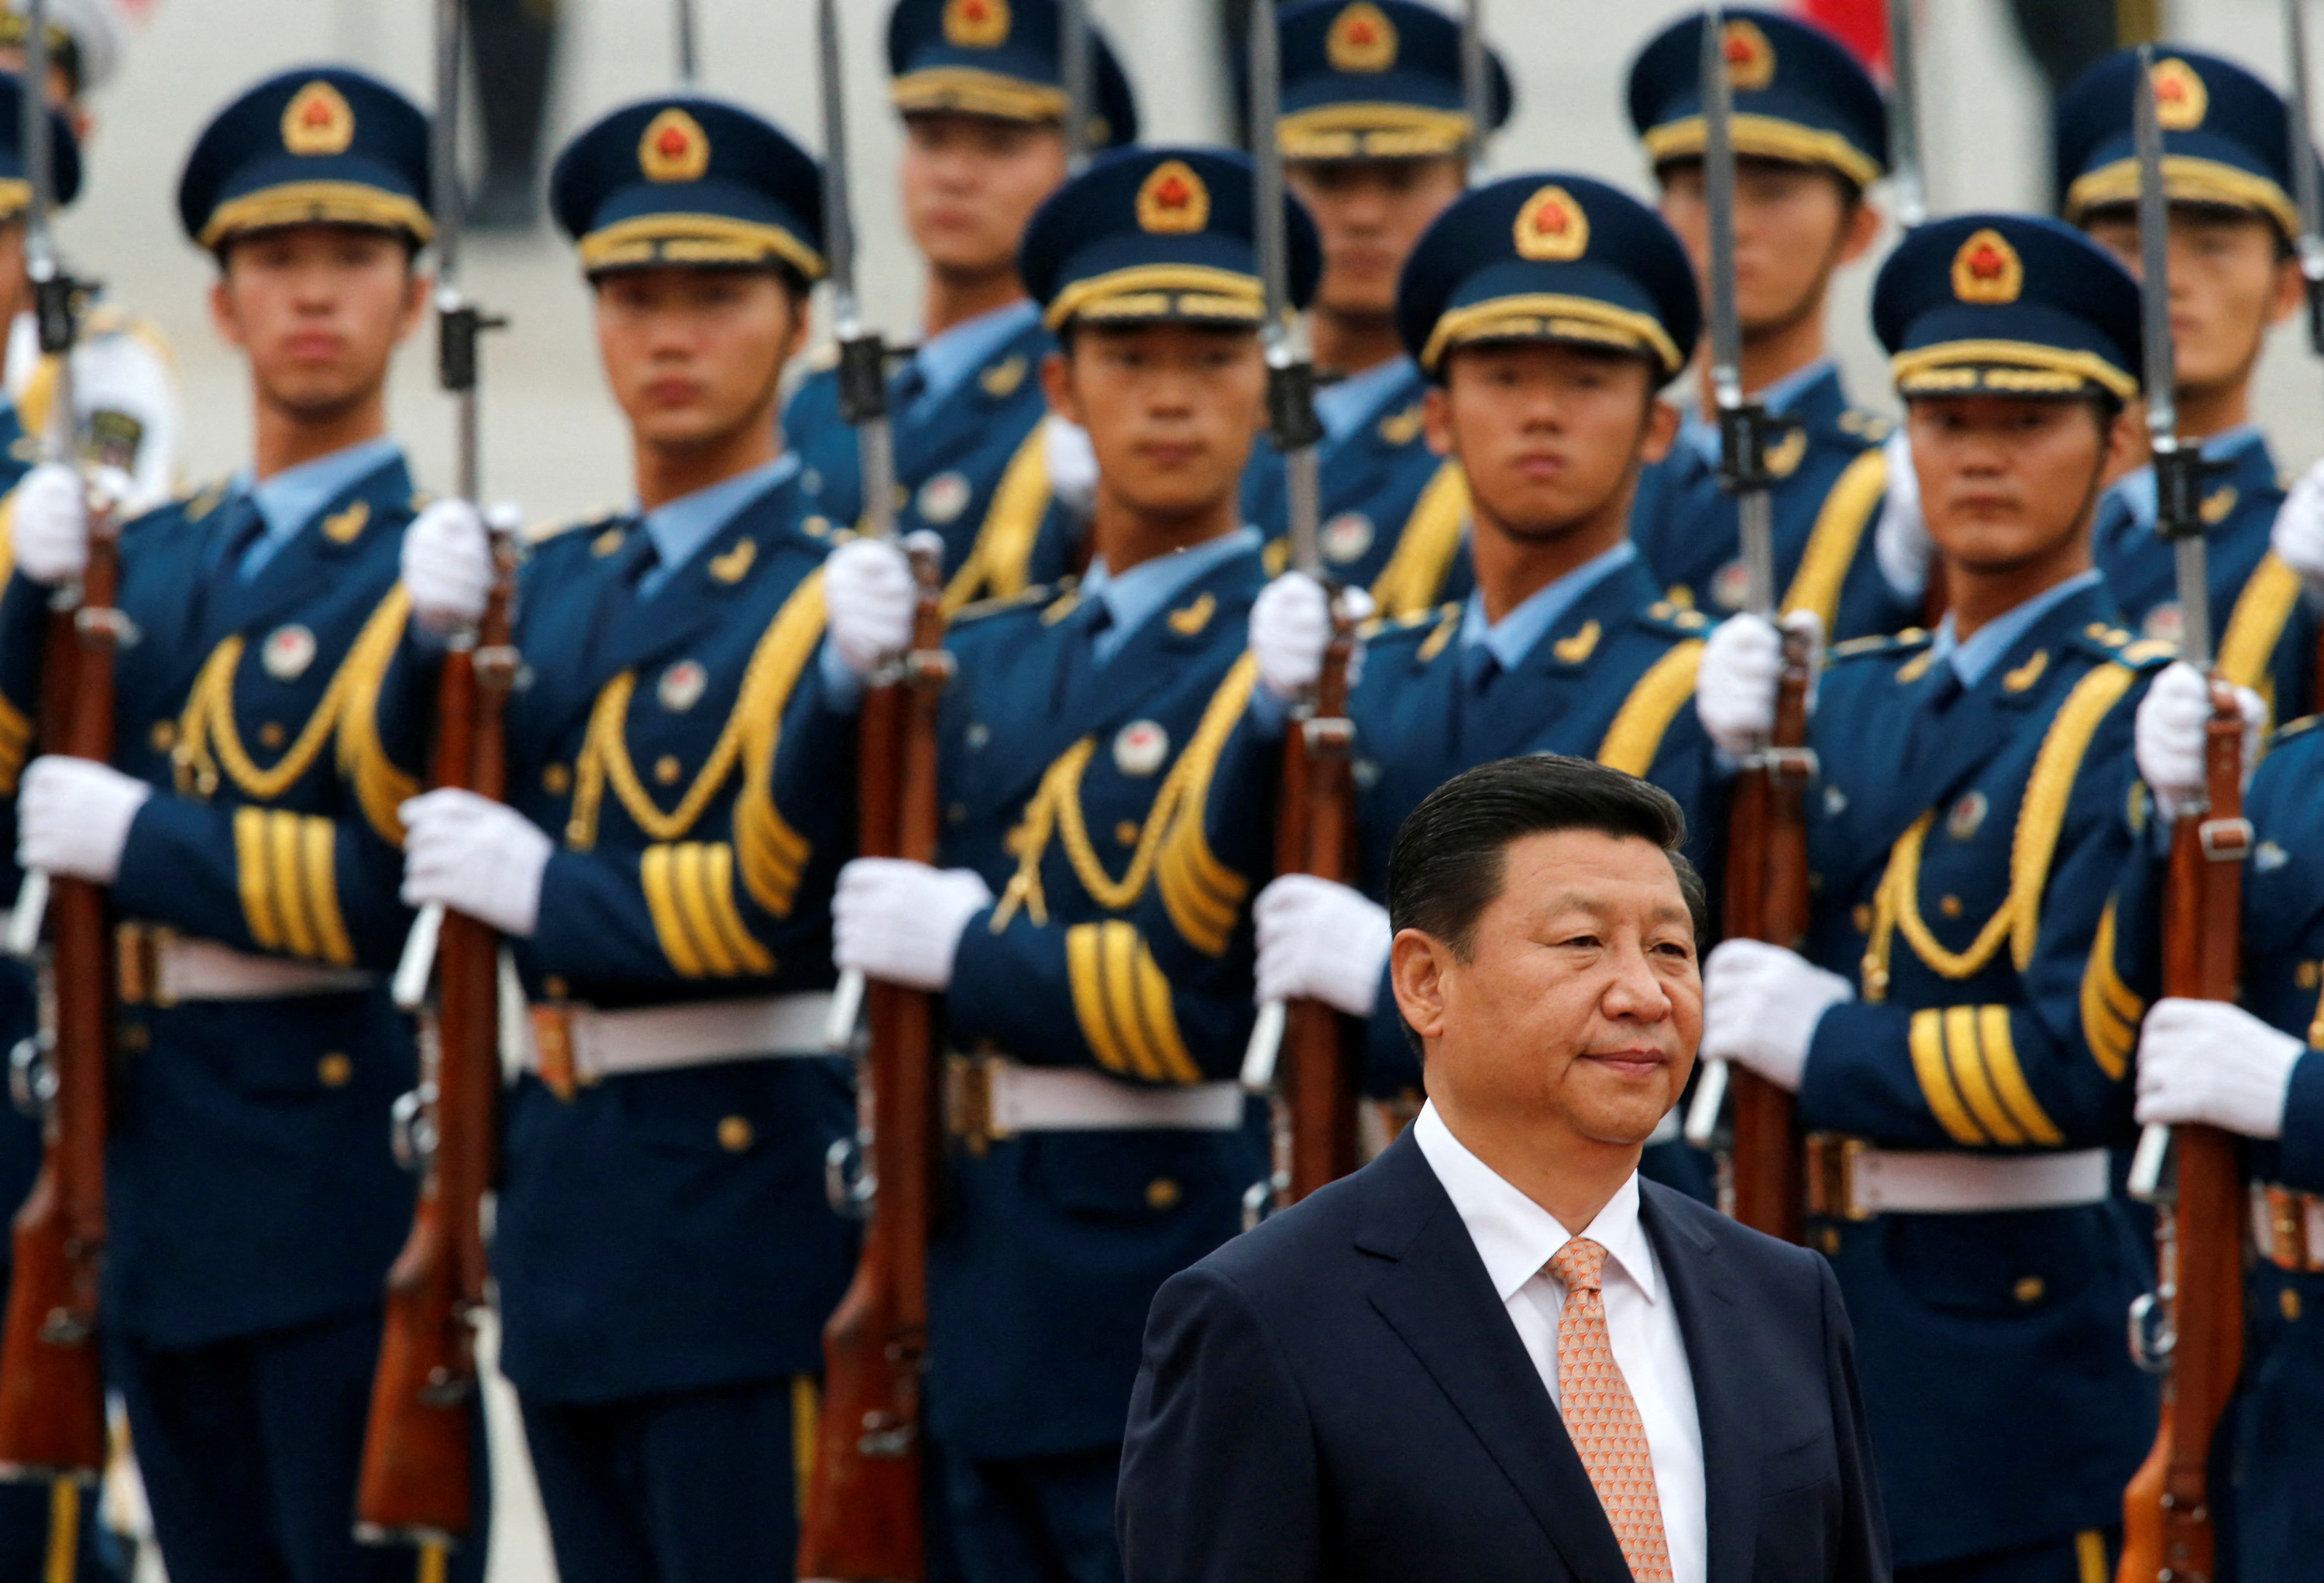 Chinese President Xi Jinping inspects an honour guard with Venezuelan President Nicolas Maduro (not pictured) at a welcoming ceremony outside the Great Hall of the People in Beijing